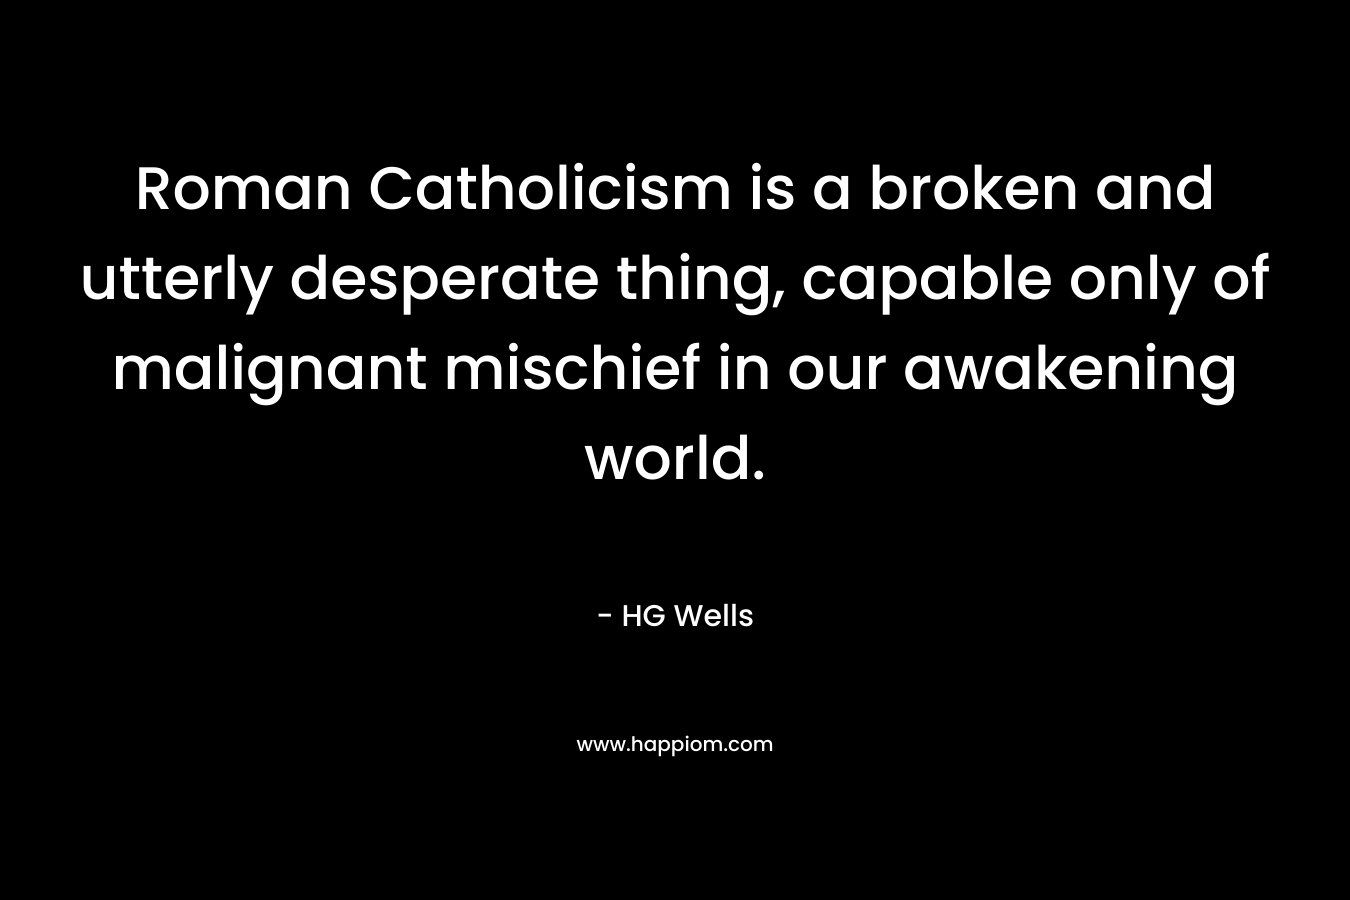 Roman Catholicism is a broken and utterly desperate thing, capable only of malignant mischief in our awakening world. – HG Wells